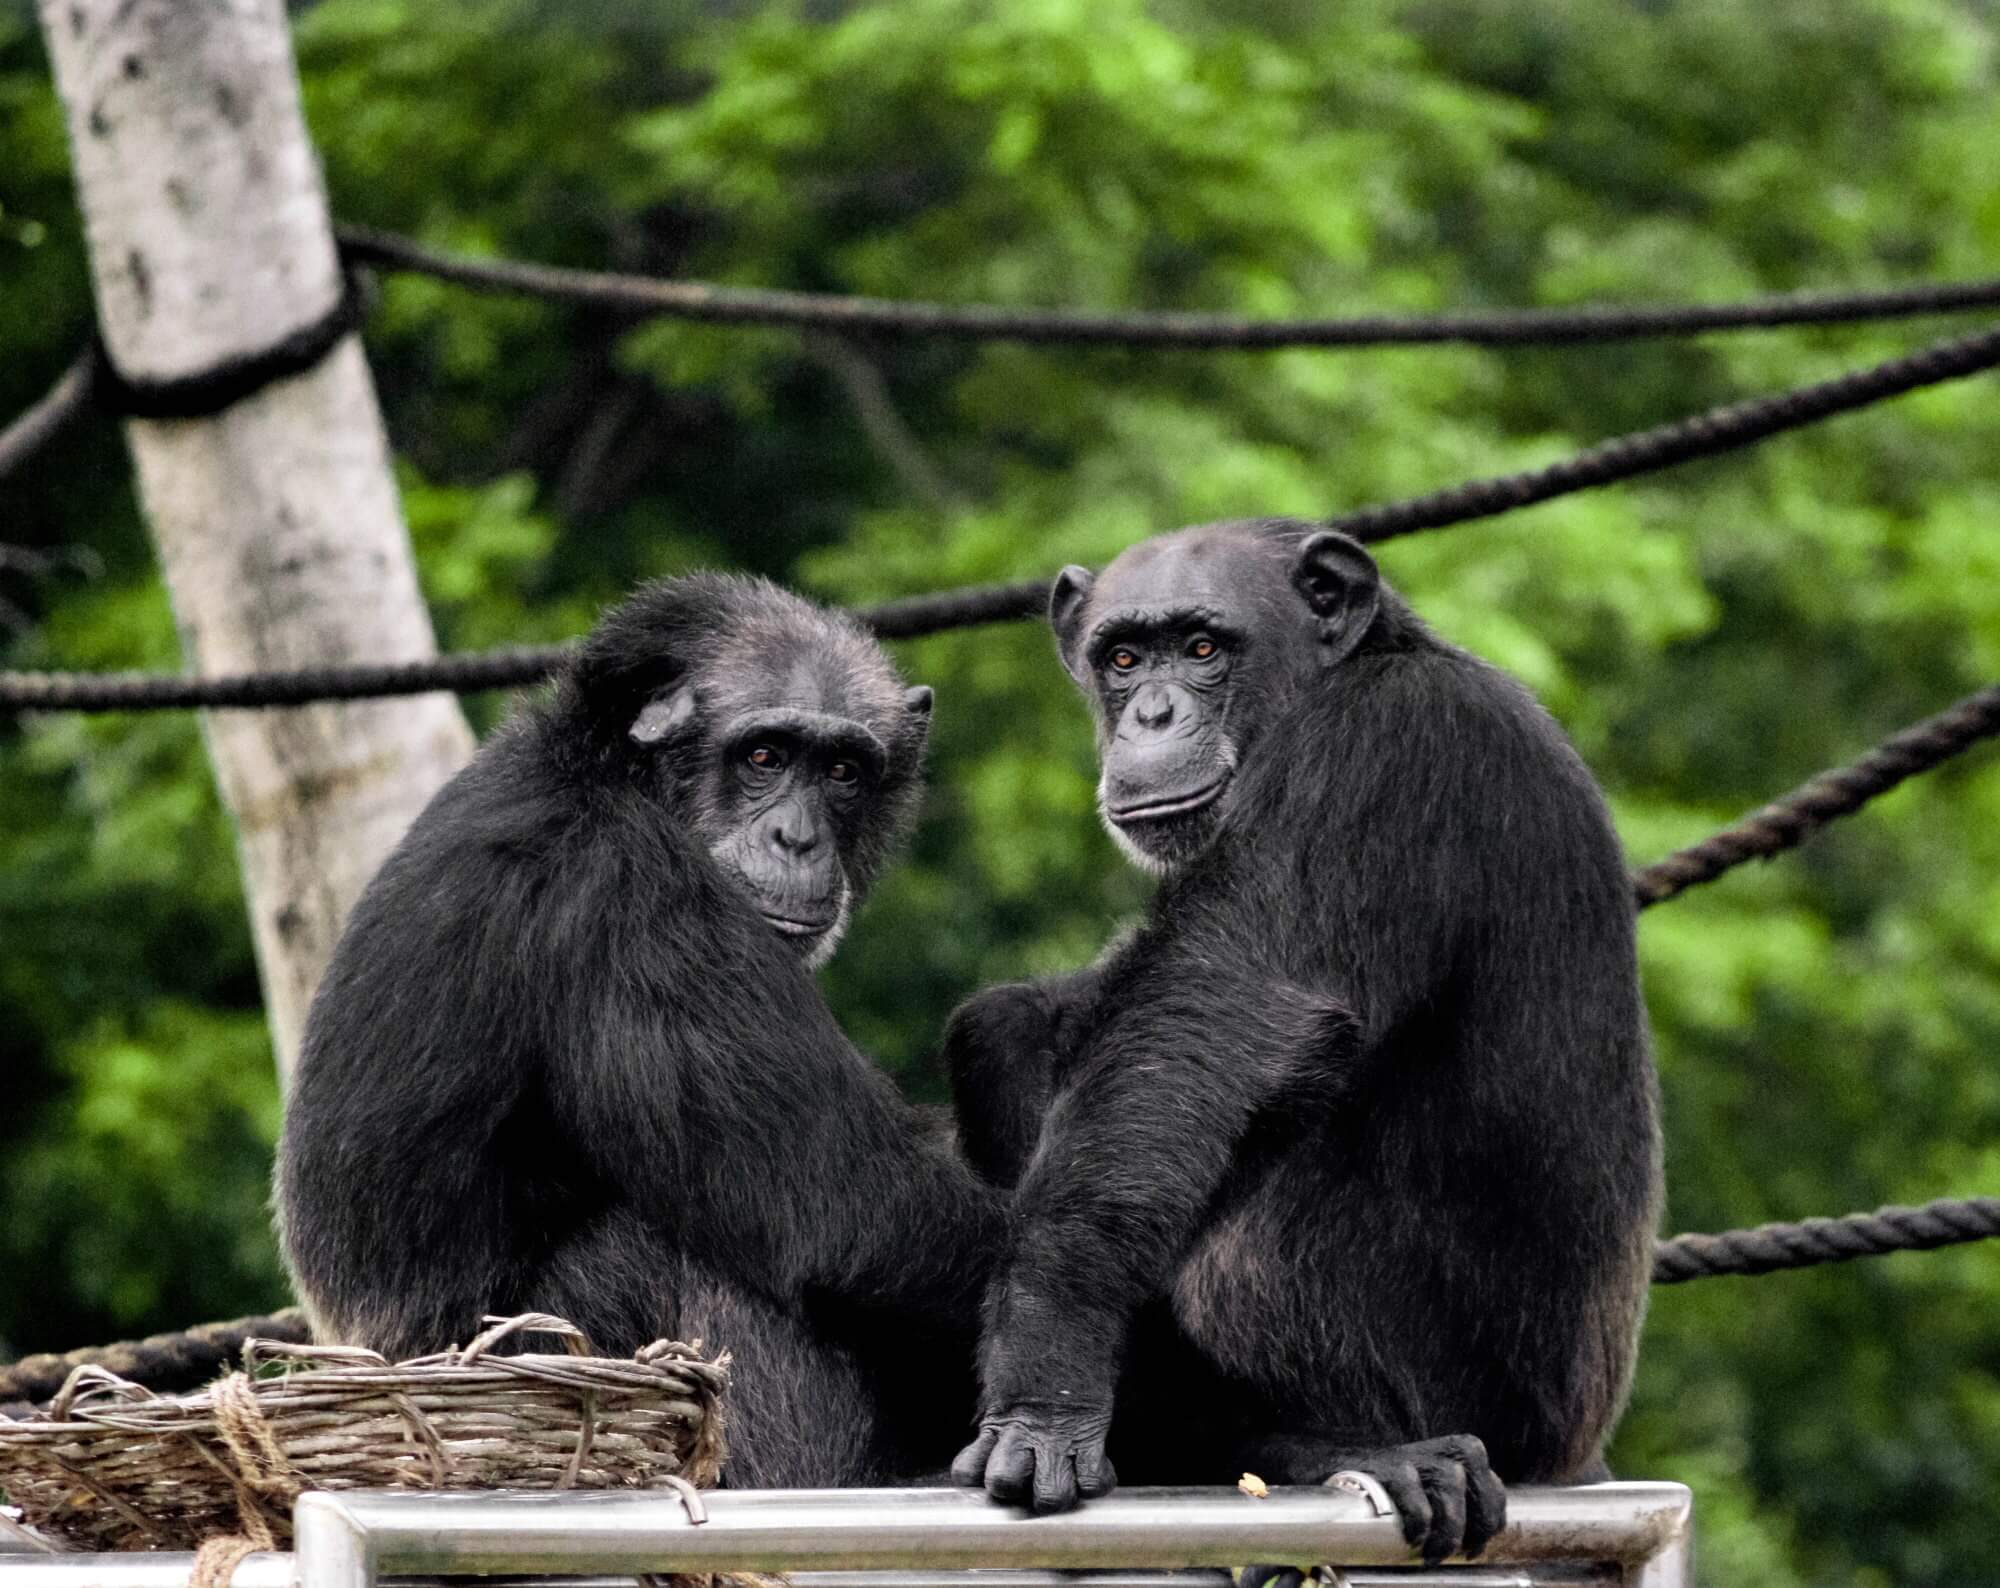 #video | Discovered a new way to communicate with chimpanzees relatives